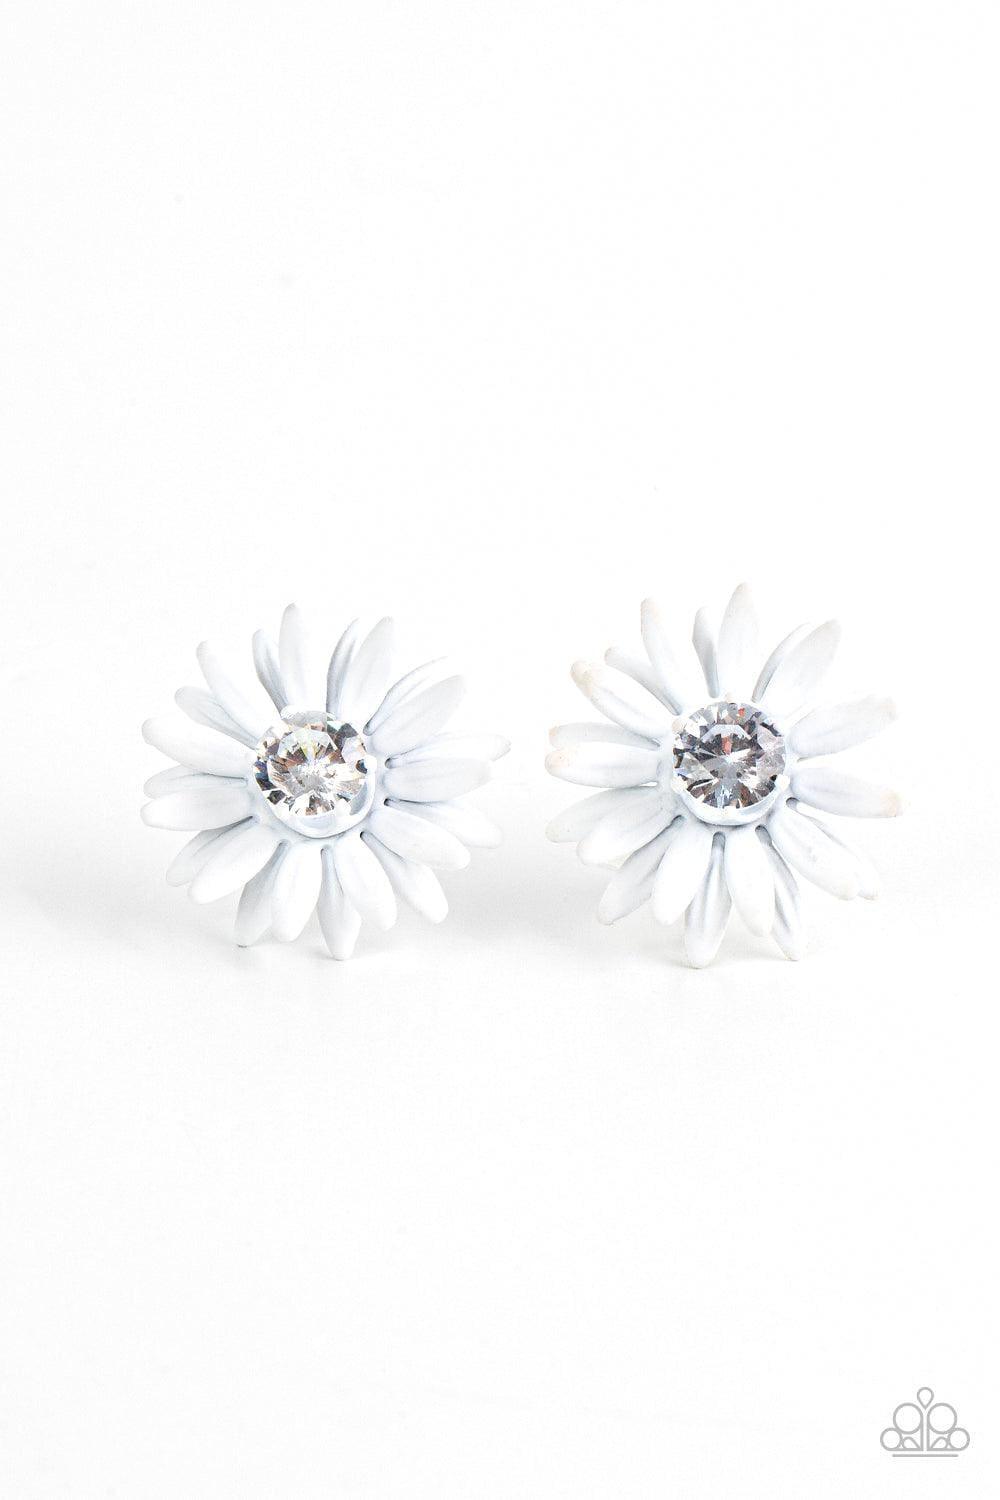 Paparazzi Accessories - Sunshiny Dais-y - White Stud Earrings - Bling by JessieK